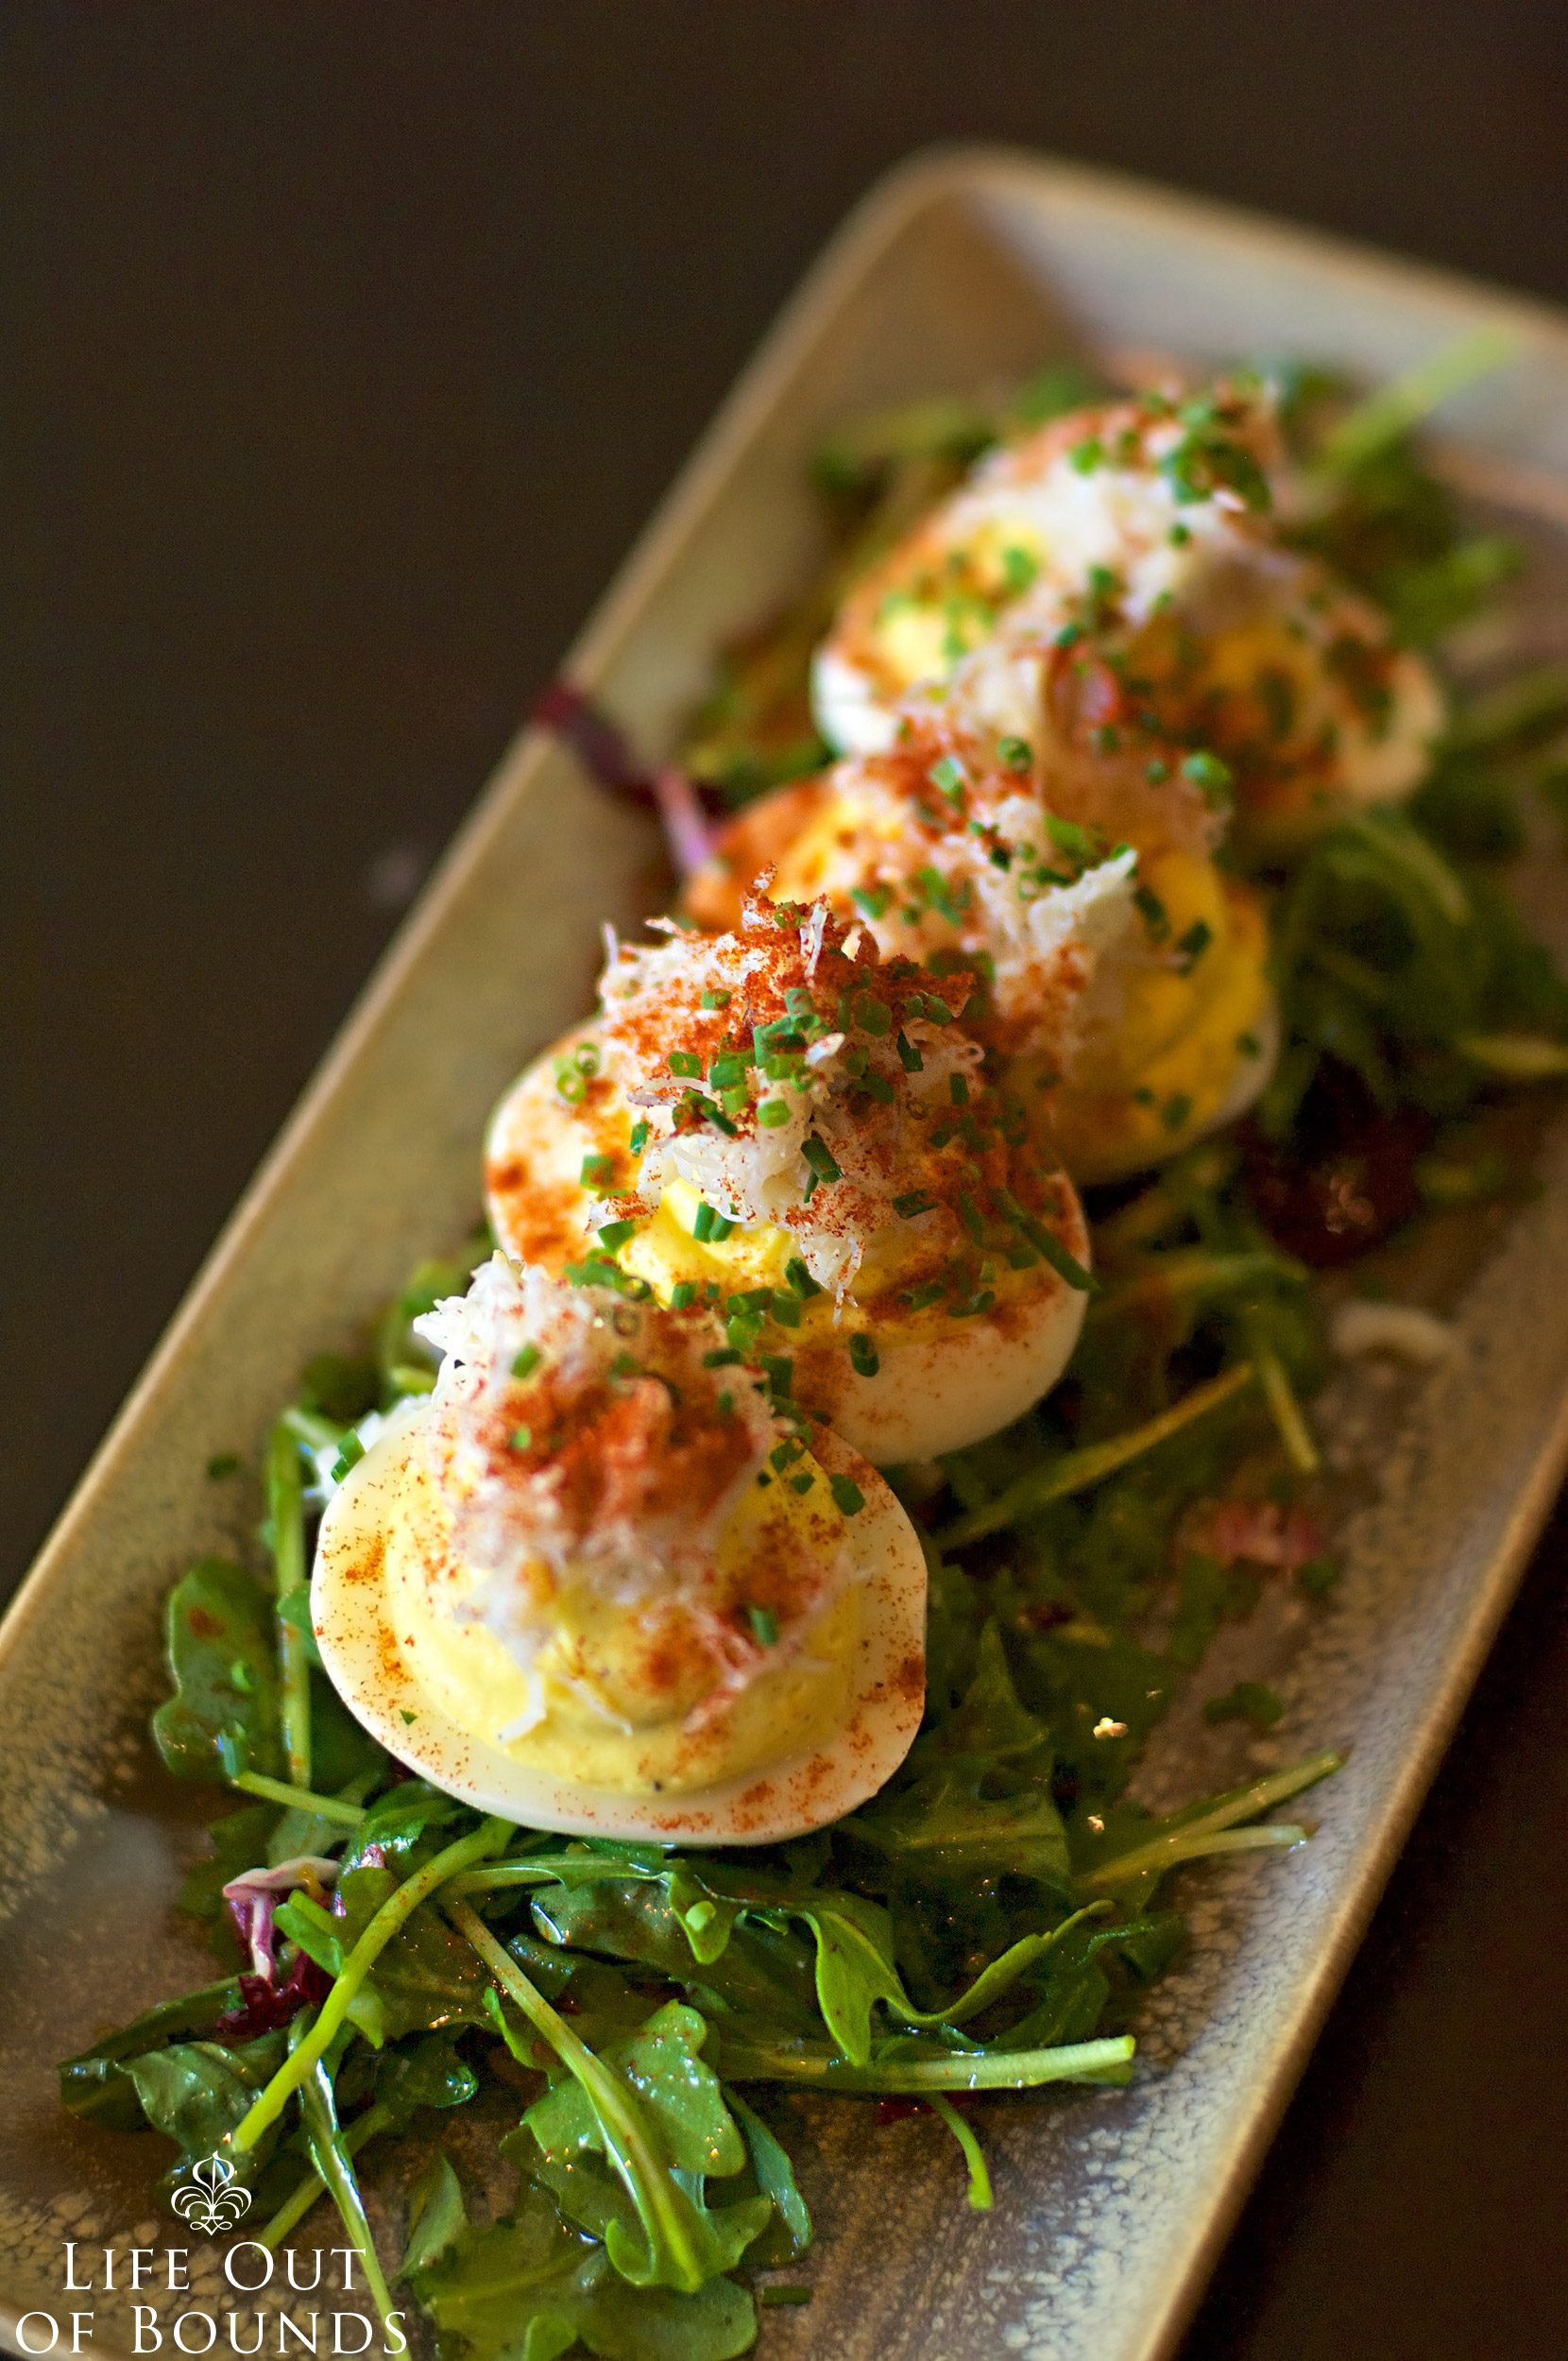 Deviled-Eggs-with-Dungeness-Crab-at-OSO-Restaurant-in-Sonoma-California